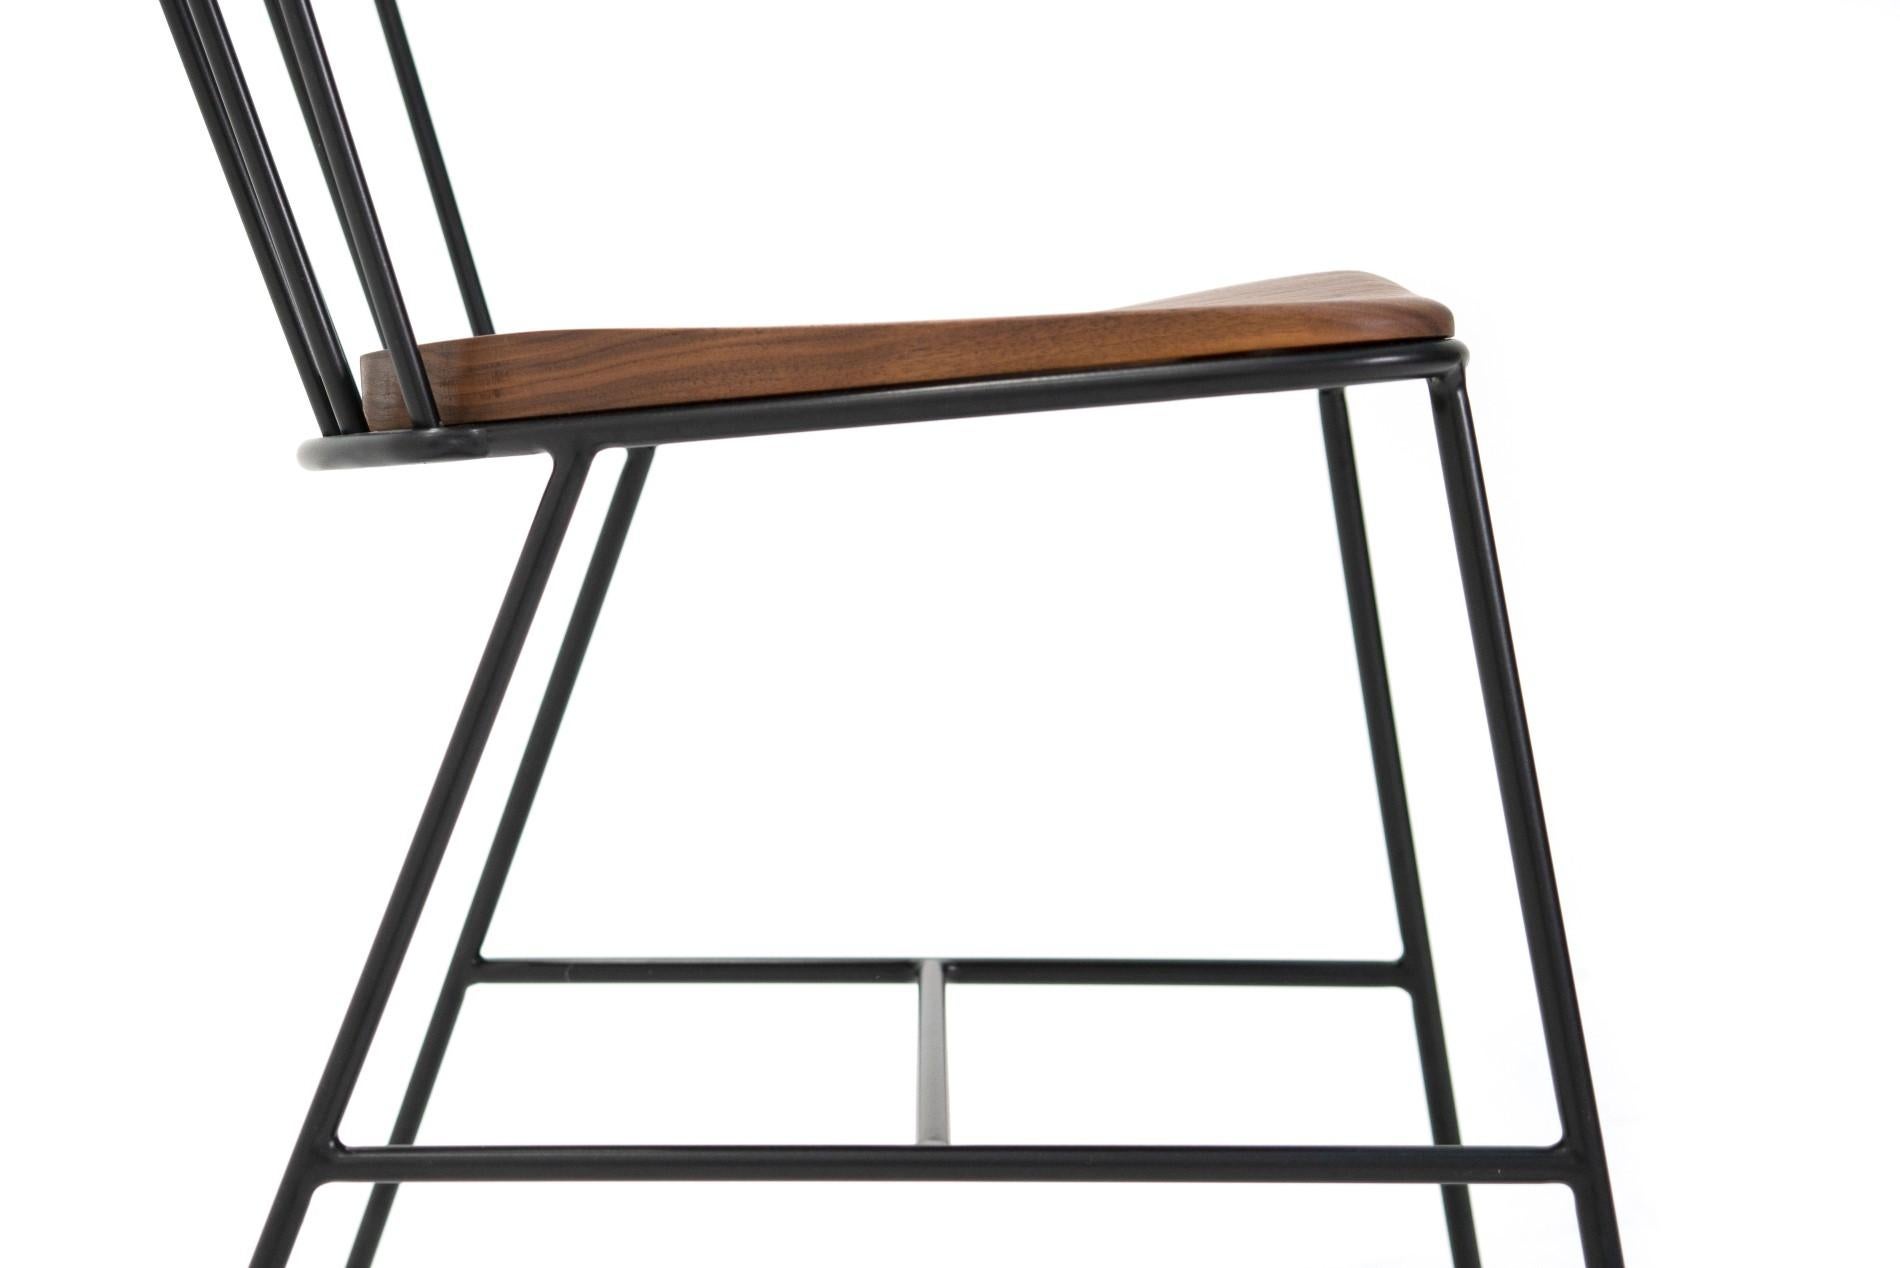 Mw Chair 01 Retro Inspired Chair in Shaped Walnut and Solid Steel Frame In Excellent Condition For Sale In beirut, LB